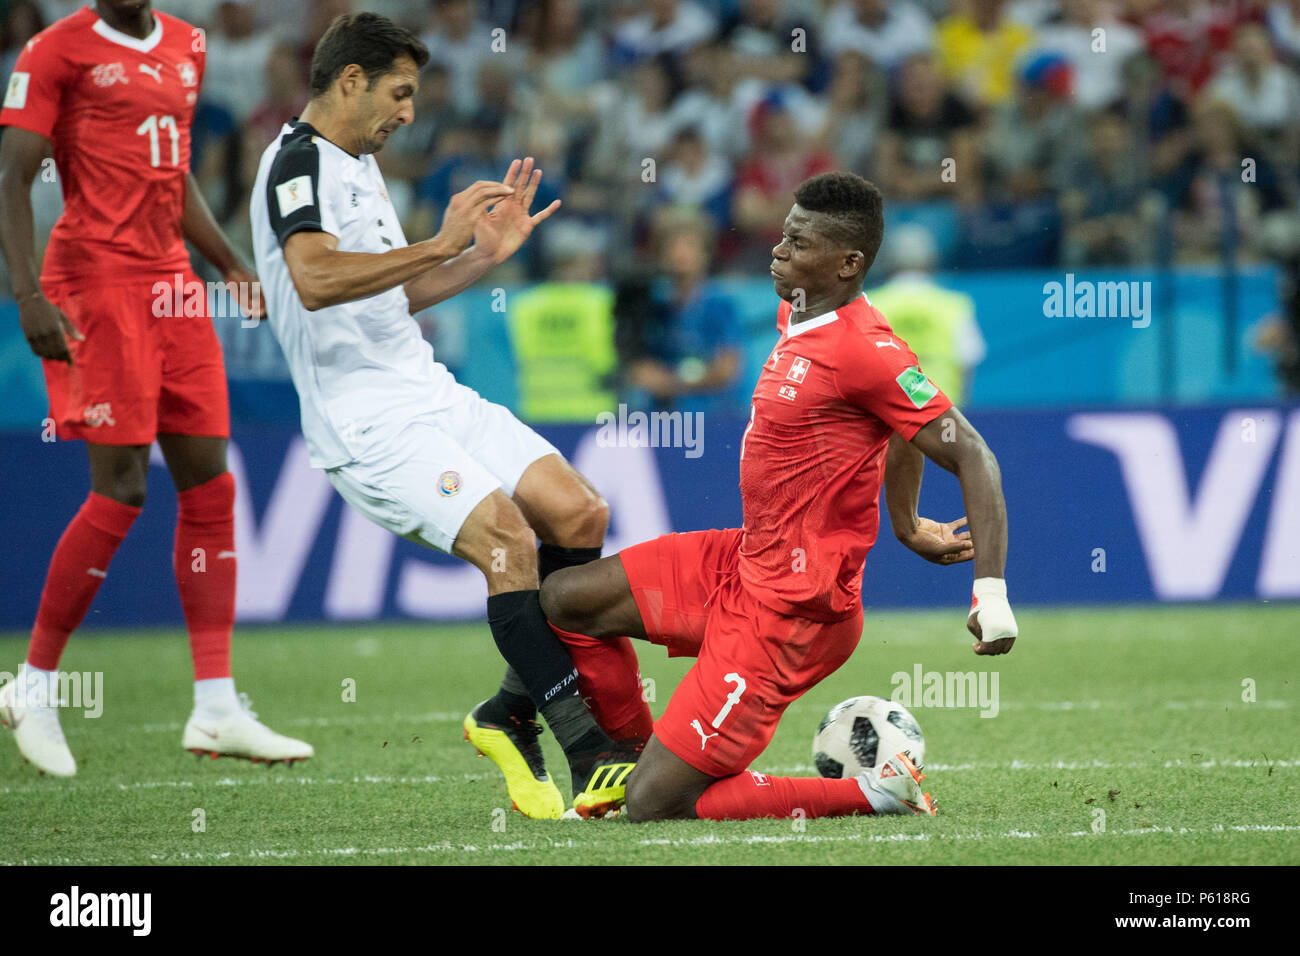 Celso BORGES (left, CRC) versus Breel EMBOLO (SUI), Action, duels, Switzerland (SUI) - Costa Rica (CRC) 2: 2, Preliminary Round, Group E, Match 43, on 27.06.2018 in Nizhny Novgorod; Football World Cup 2018 in Russia from 14.06. - 15.07.2018. | usage worldwide Stock Photo